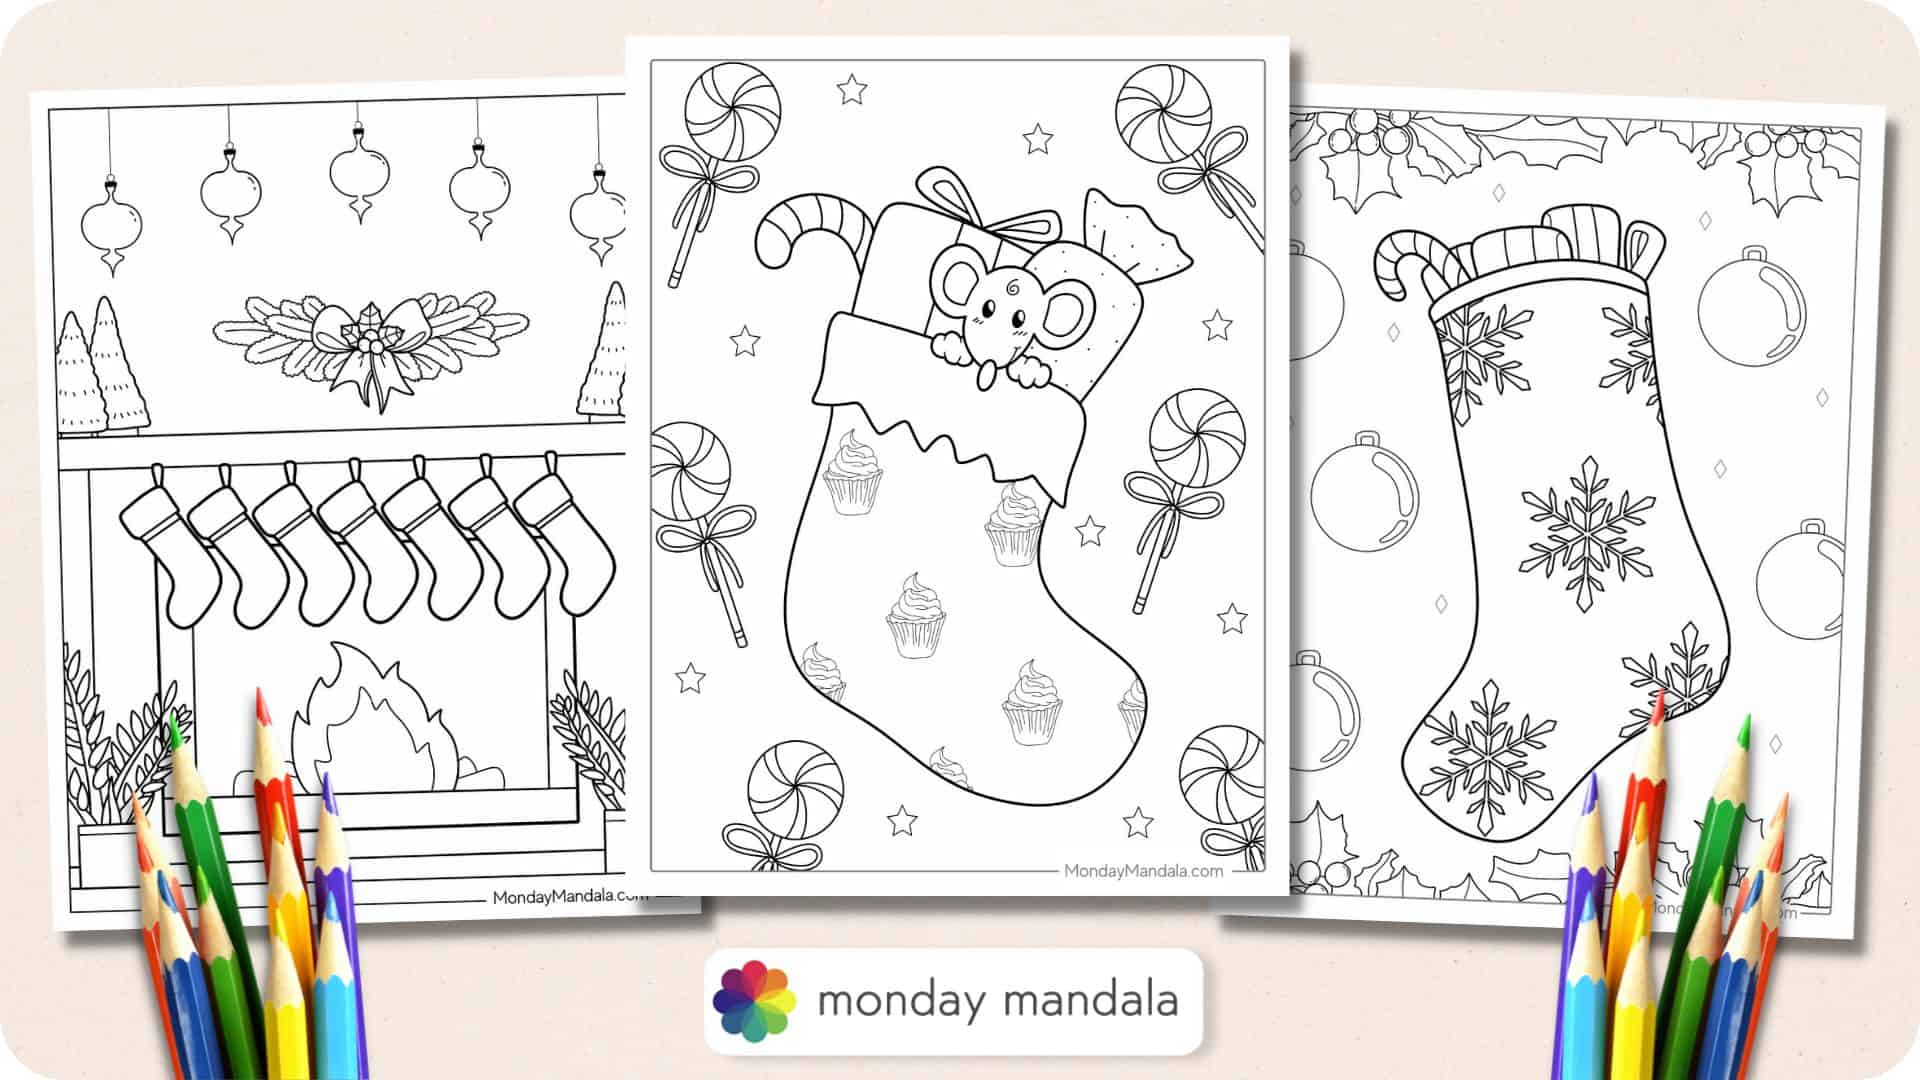 Christmas stockings coloring pages free printables